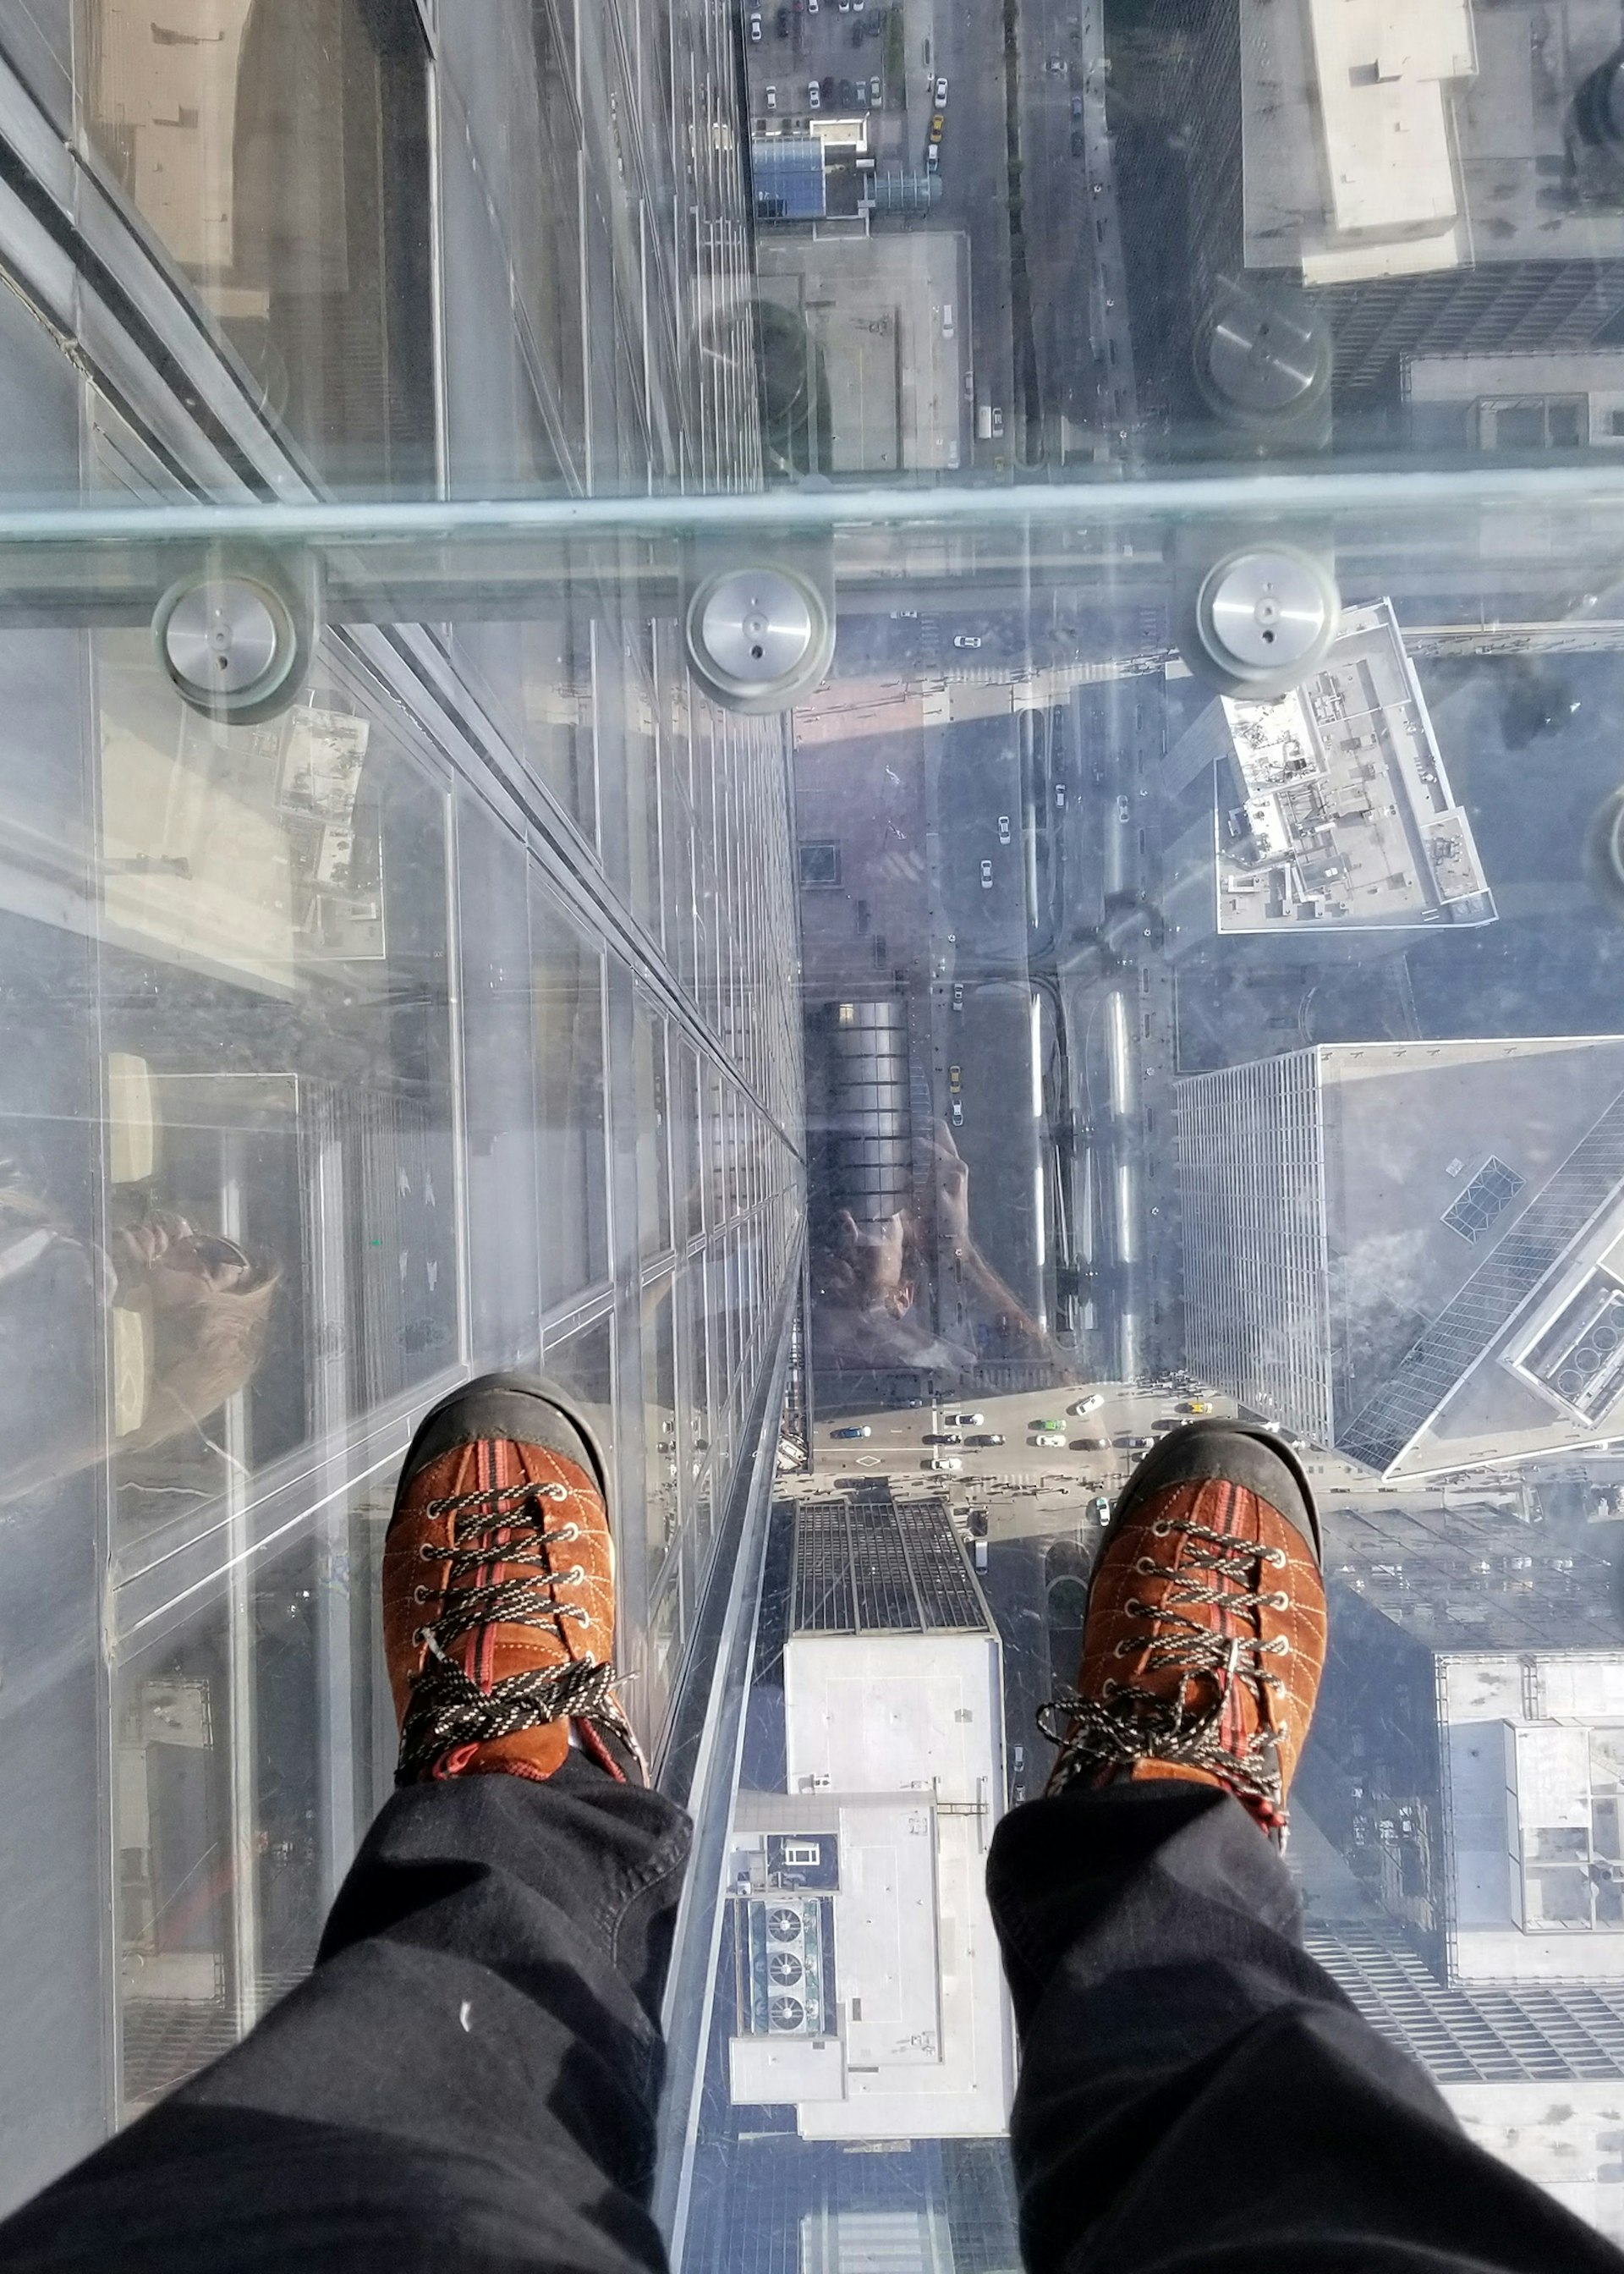 Feet on the glass balcony at the Skydeck of the Willis Tower, Chicago © Geraldo Ramos / Shutterstock